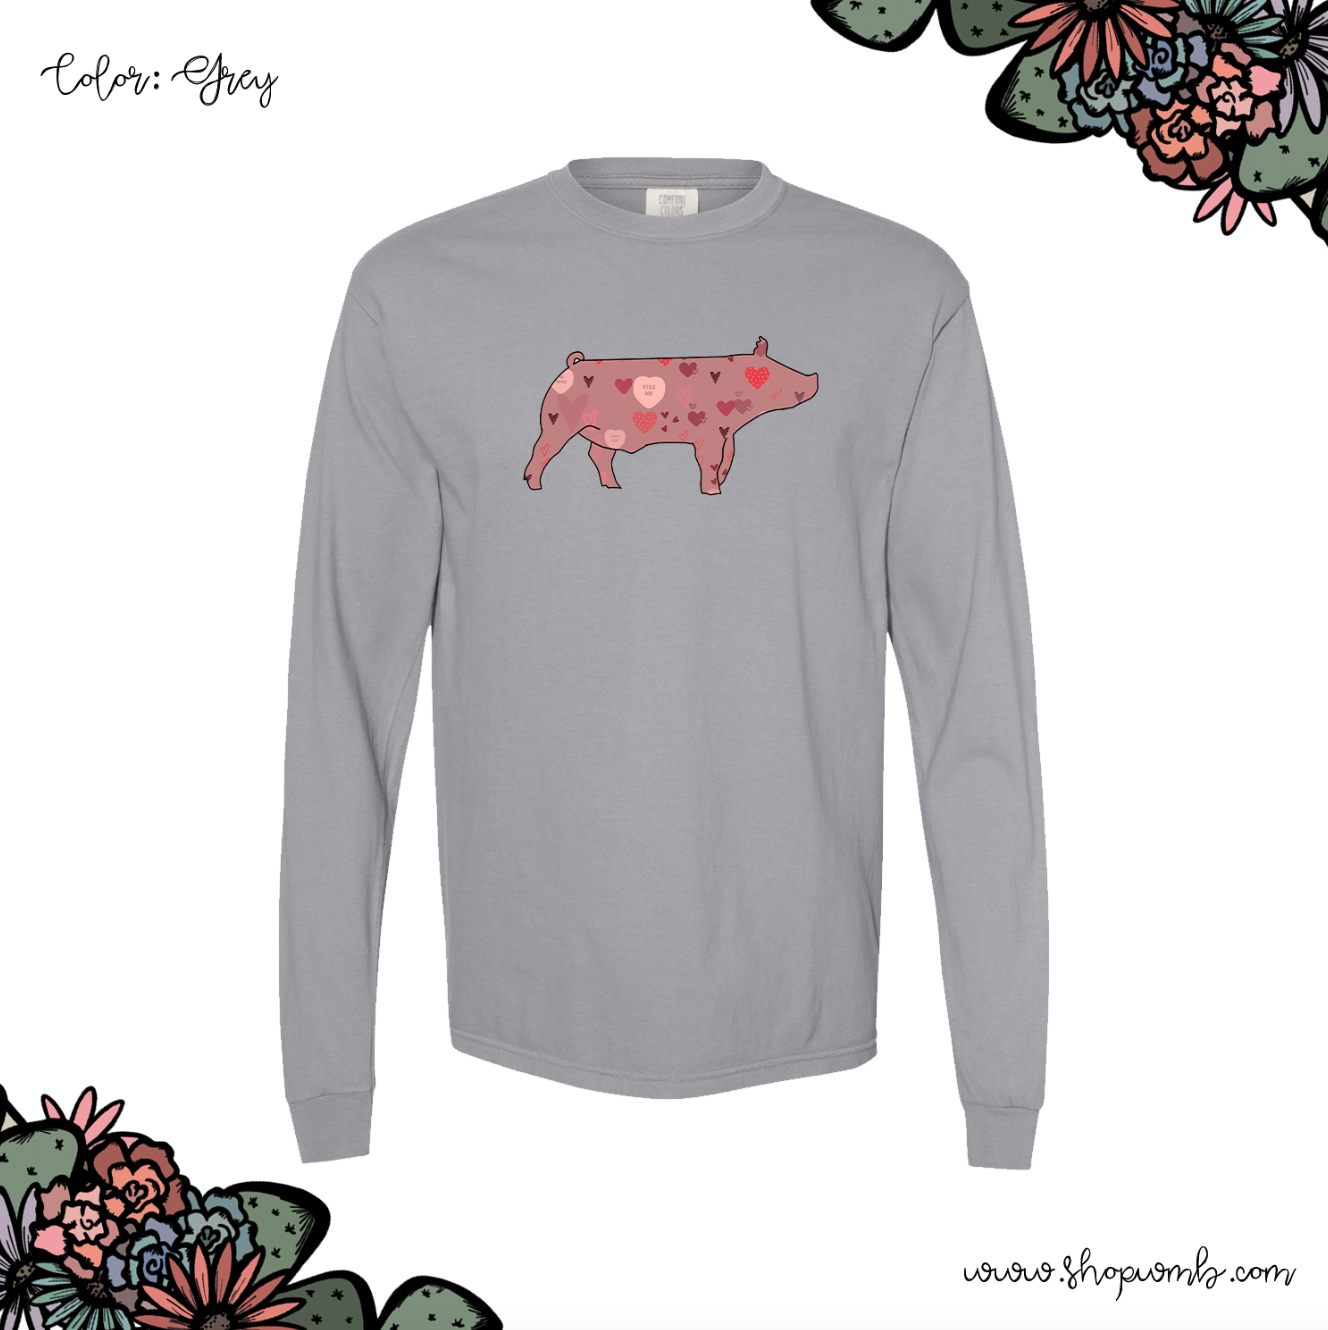 Valentines Pig LONG SLEEVE T-Shirt (S-3XL) - Multiple Colors!